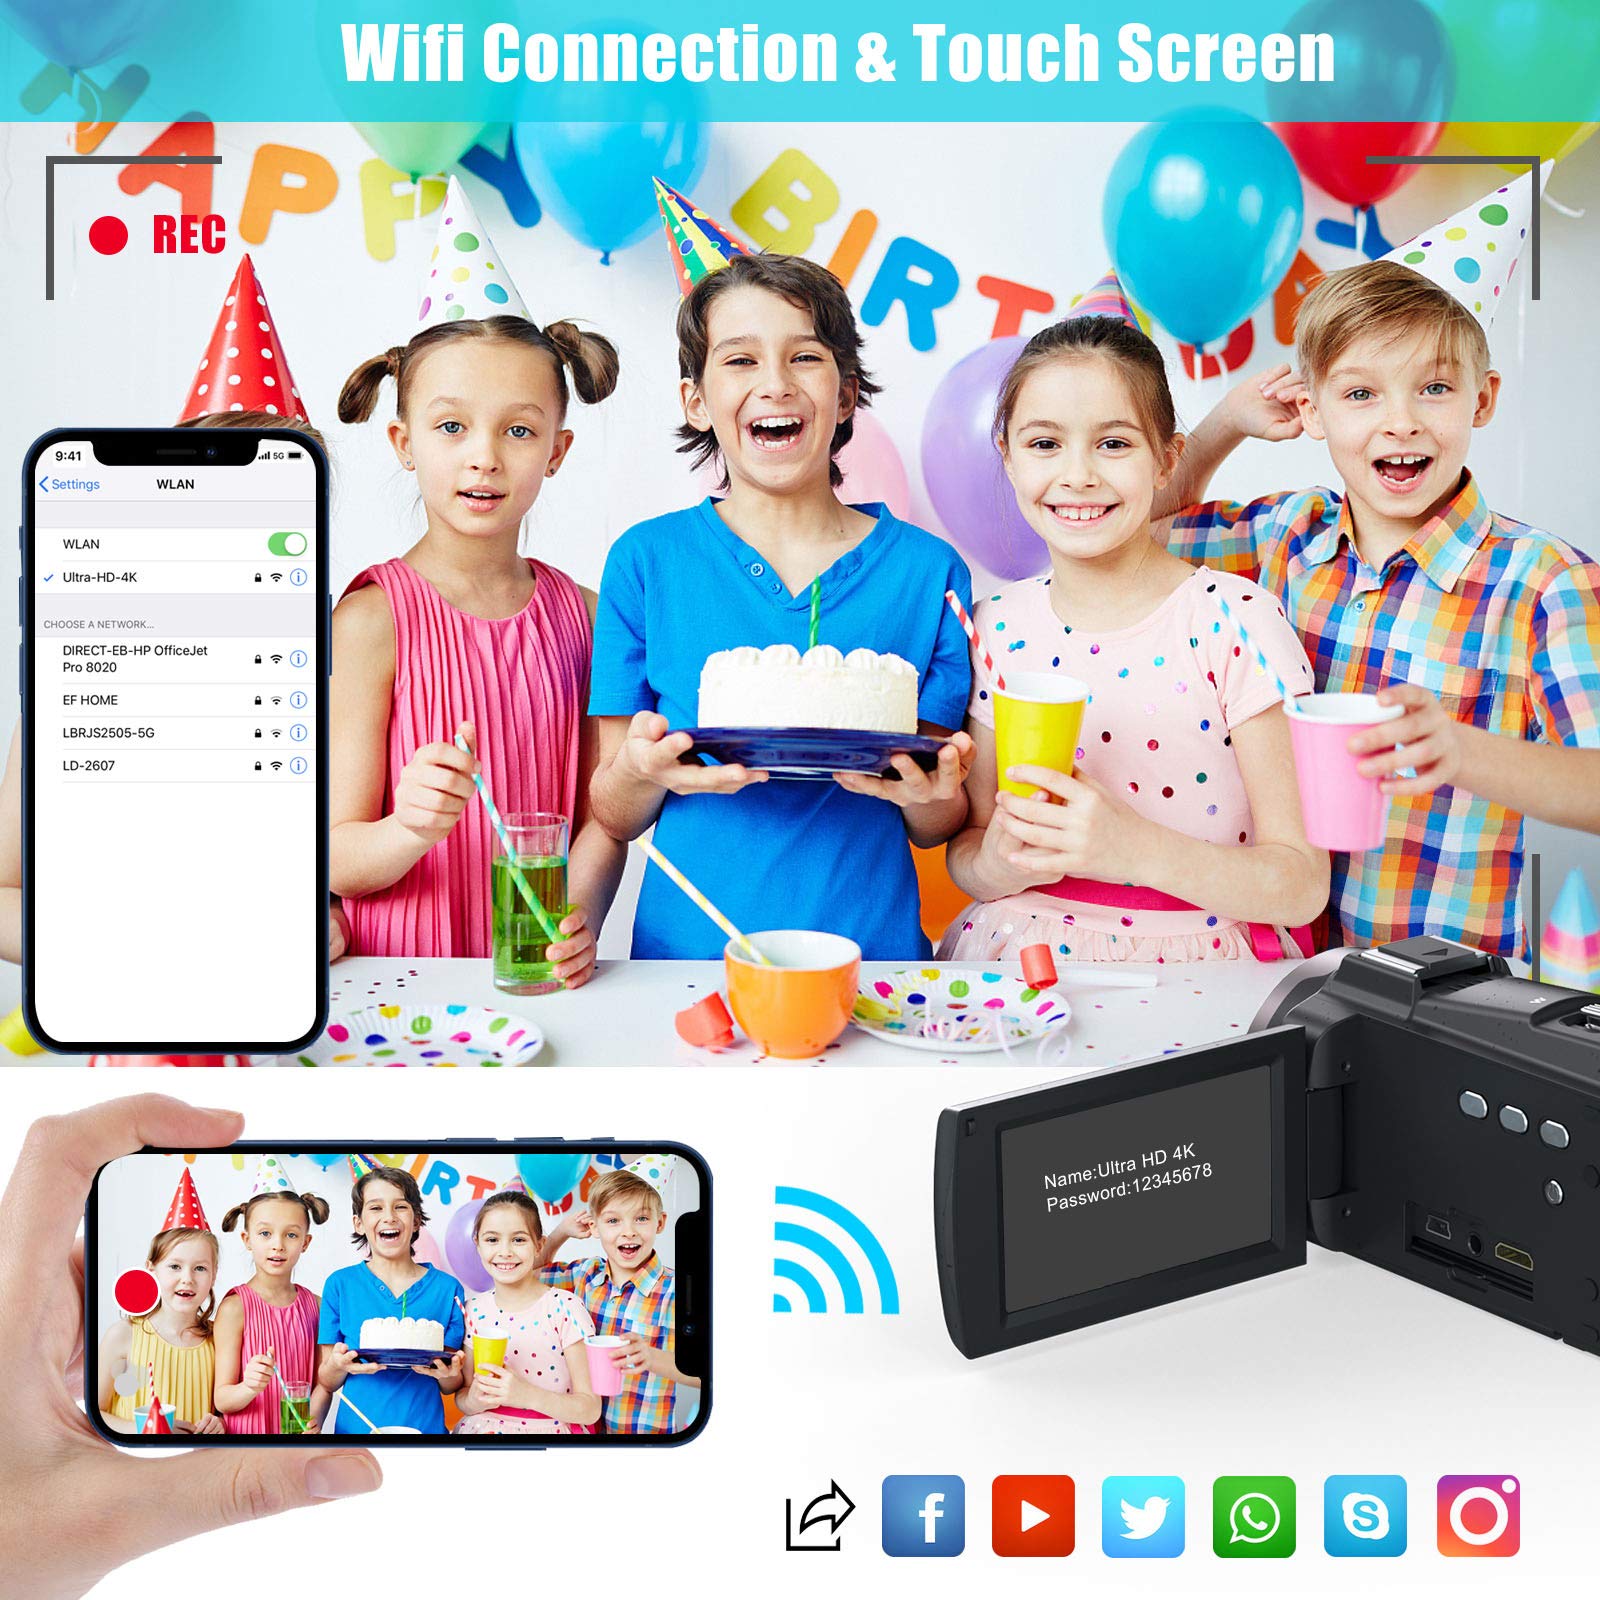 2021 New Upgraded Video Camera Camcorder, 4K WiFi Ultra HD 48MP Vlogging Recorder with IPS Touch Screen, IR Night Vision Digital Camcorder with Stabilizer, Mic, Remote Control, Lens Hood, 2 Batteries